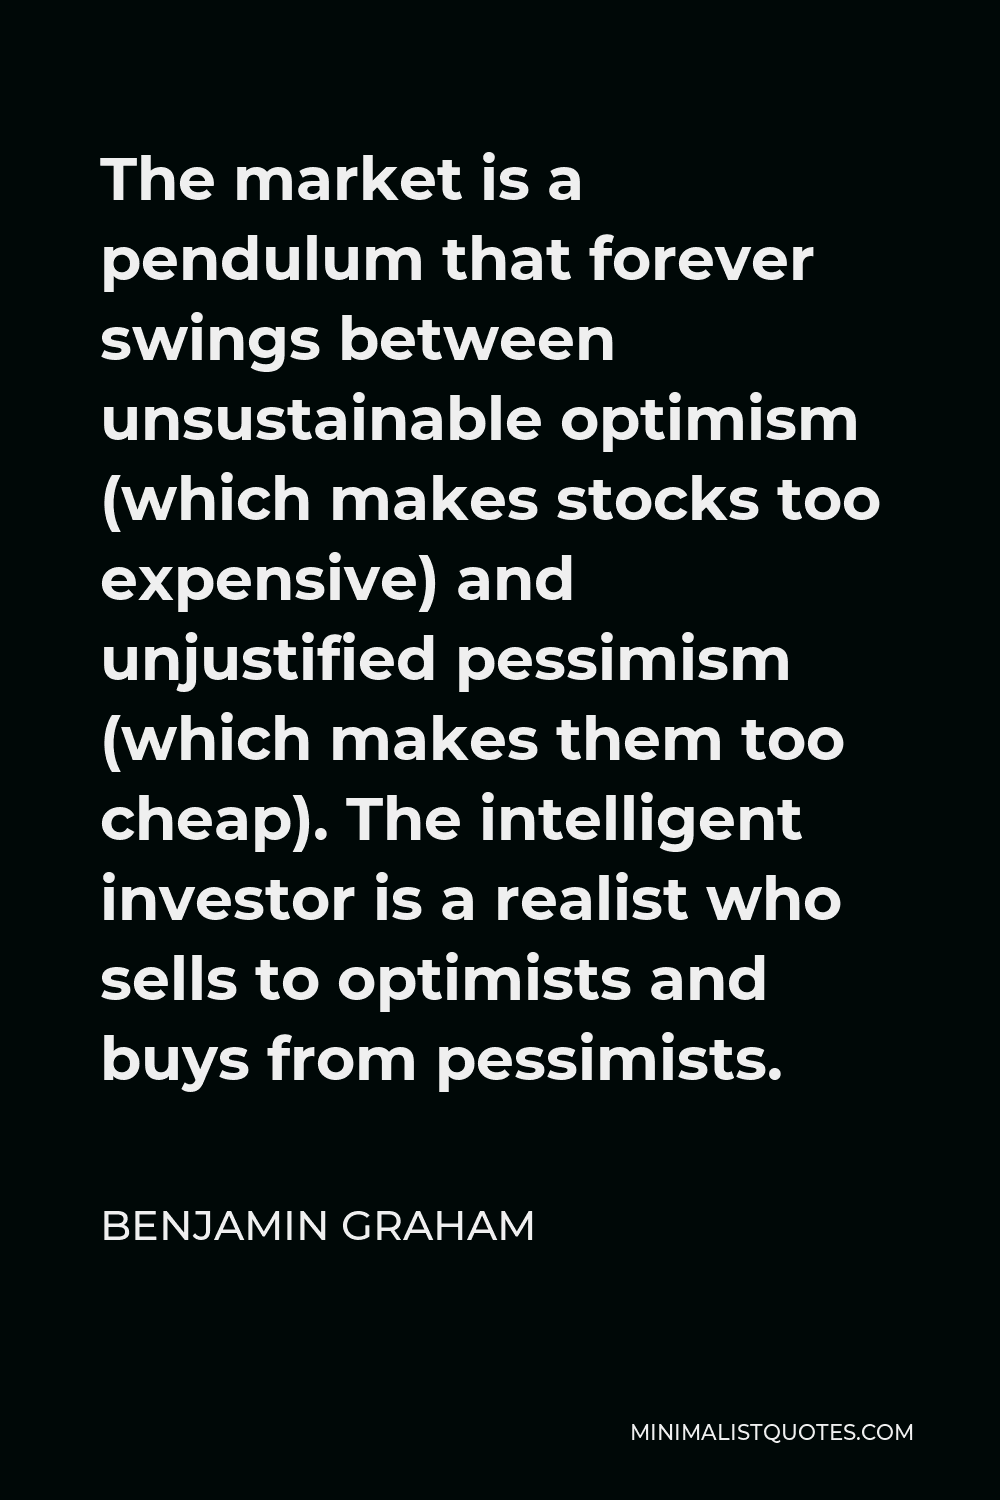 Benjamin Graham Quote - The market is a pendulum that forever swings between unsustainable optimism (which makes stocks too expensive) and unjustified pessimism (which makes them too cheap). The intelligent investor is a realist who sells to optimists and buys from pessimists.